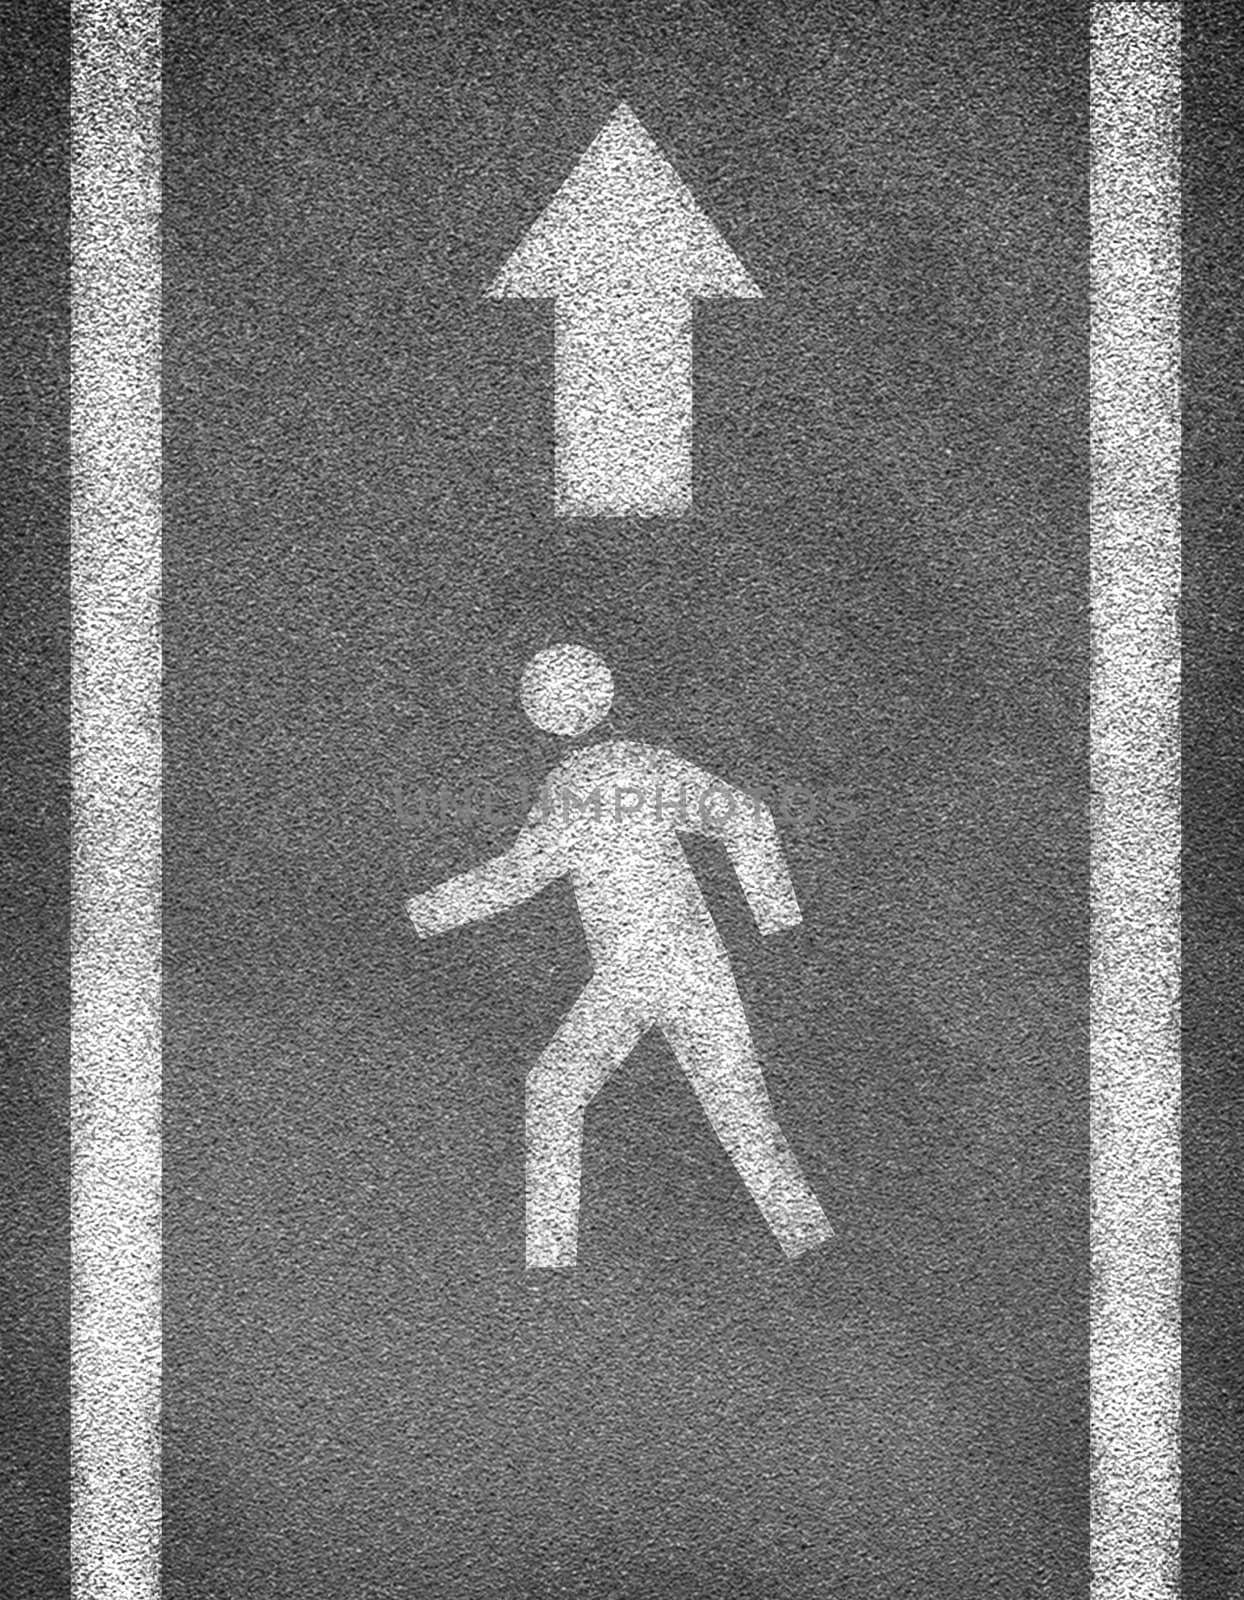 Asphalt road texture with two line and pedestrian sign by cherezoff